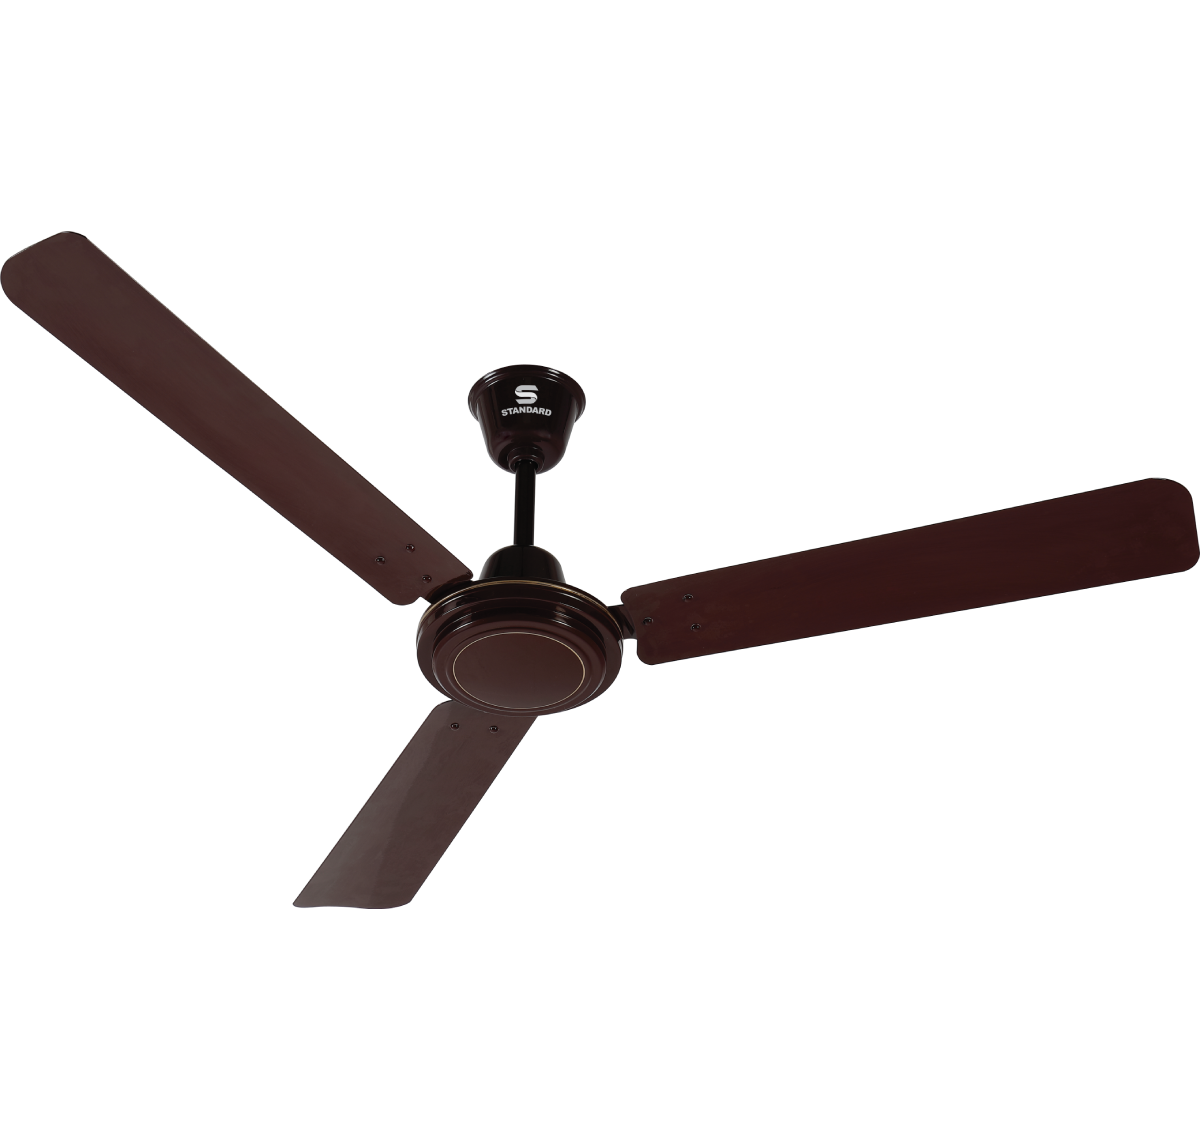 Buy India's Best Ceiling Fans - standard electricals